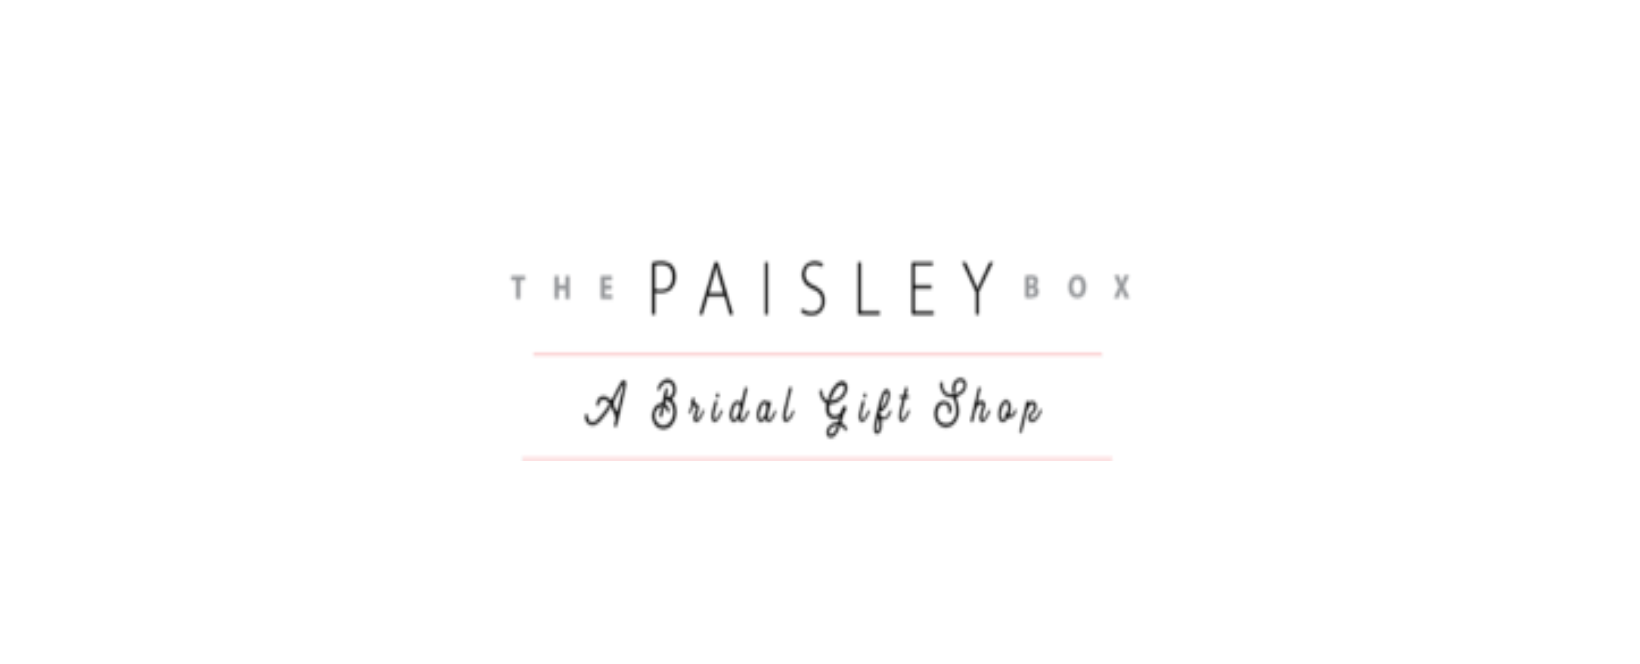 The Paisley Box Discount Code 2022